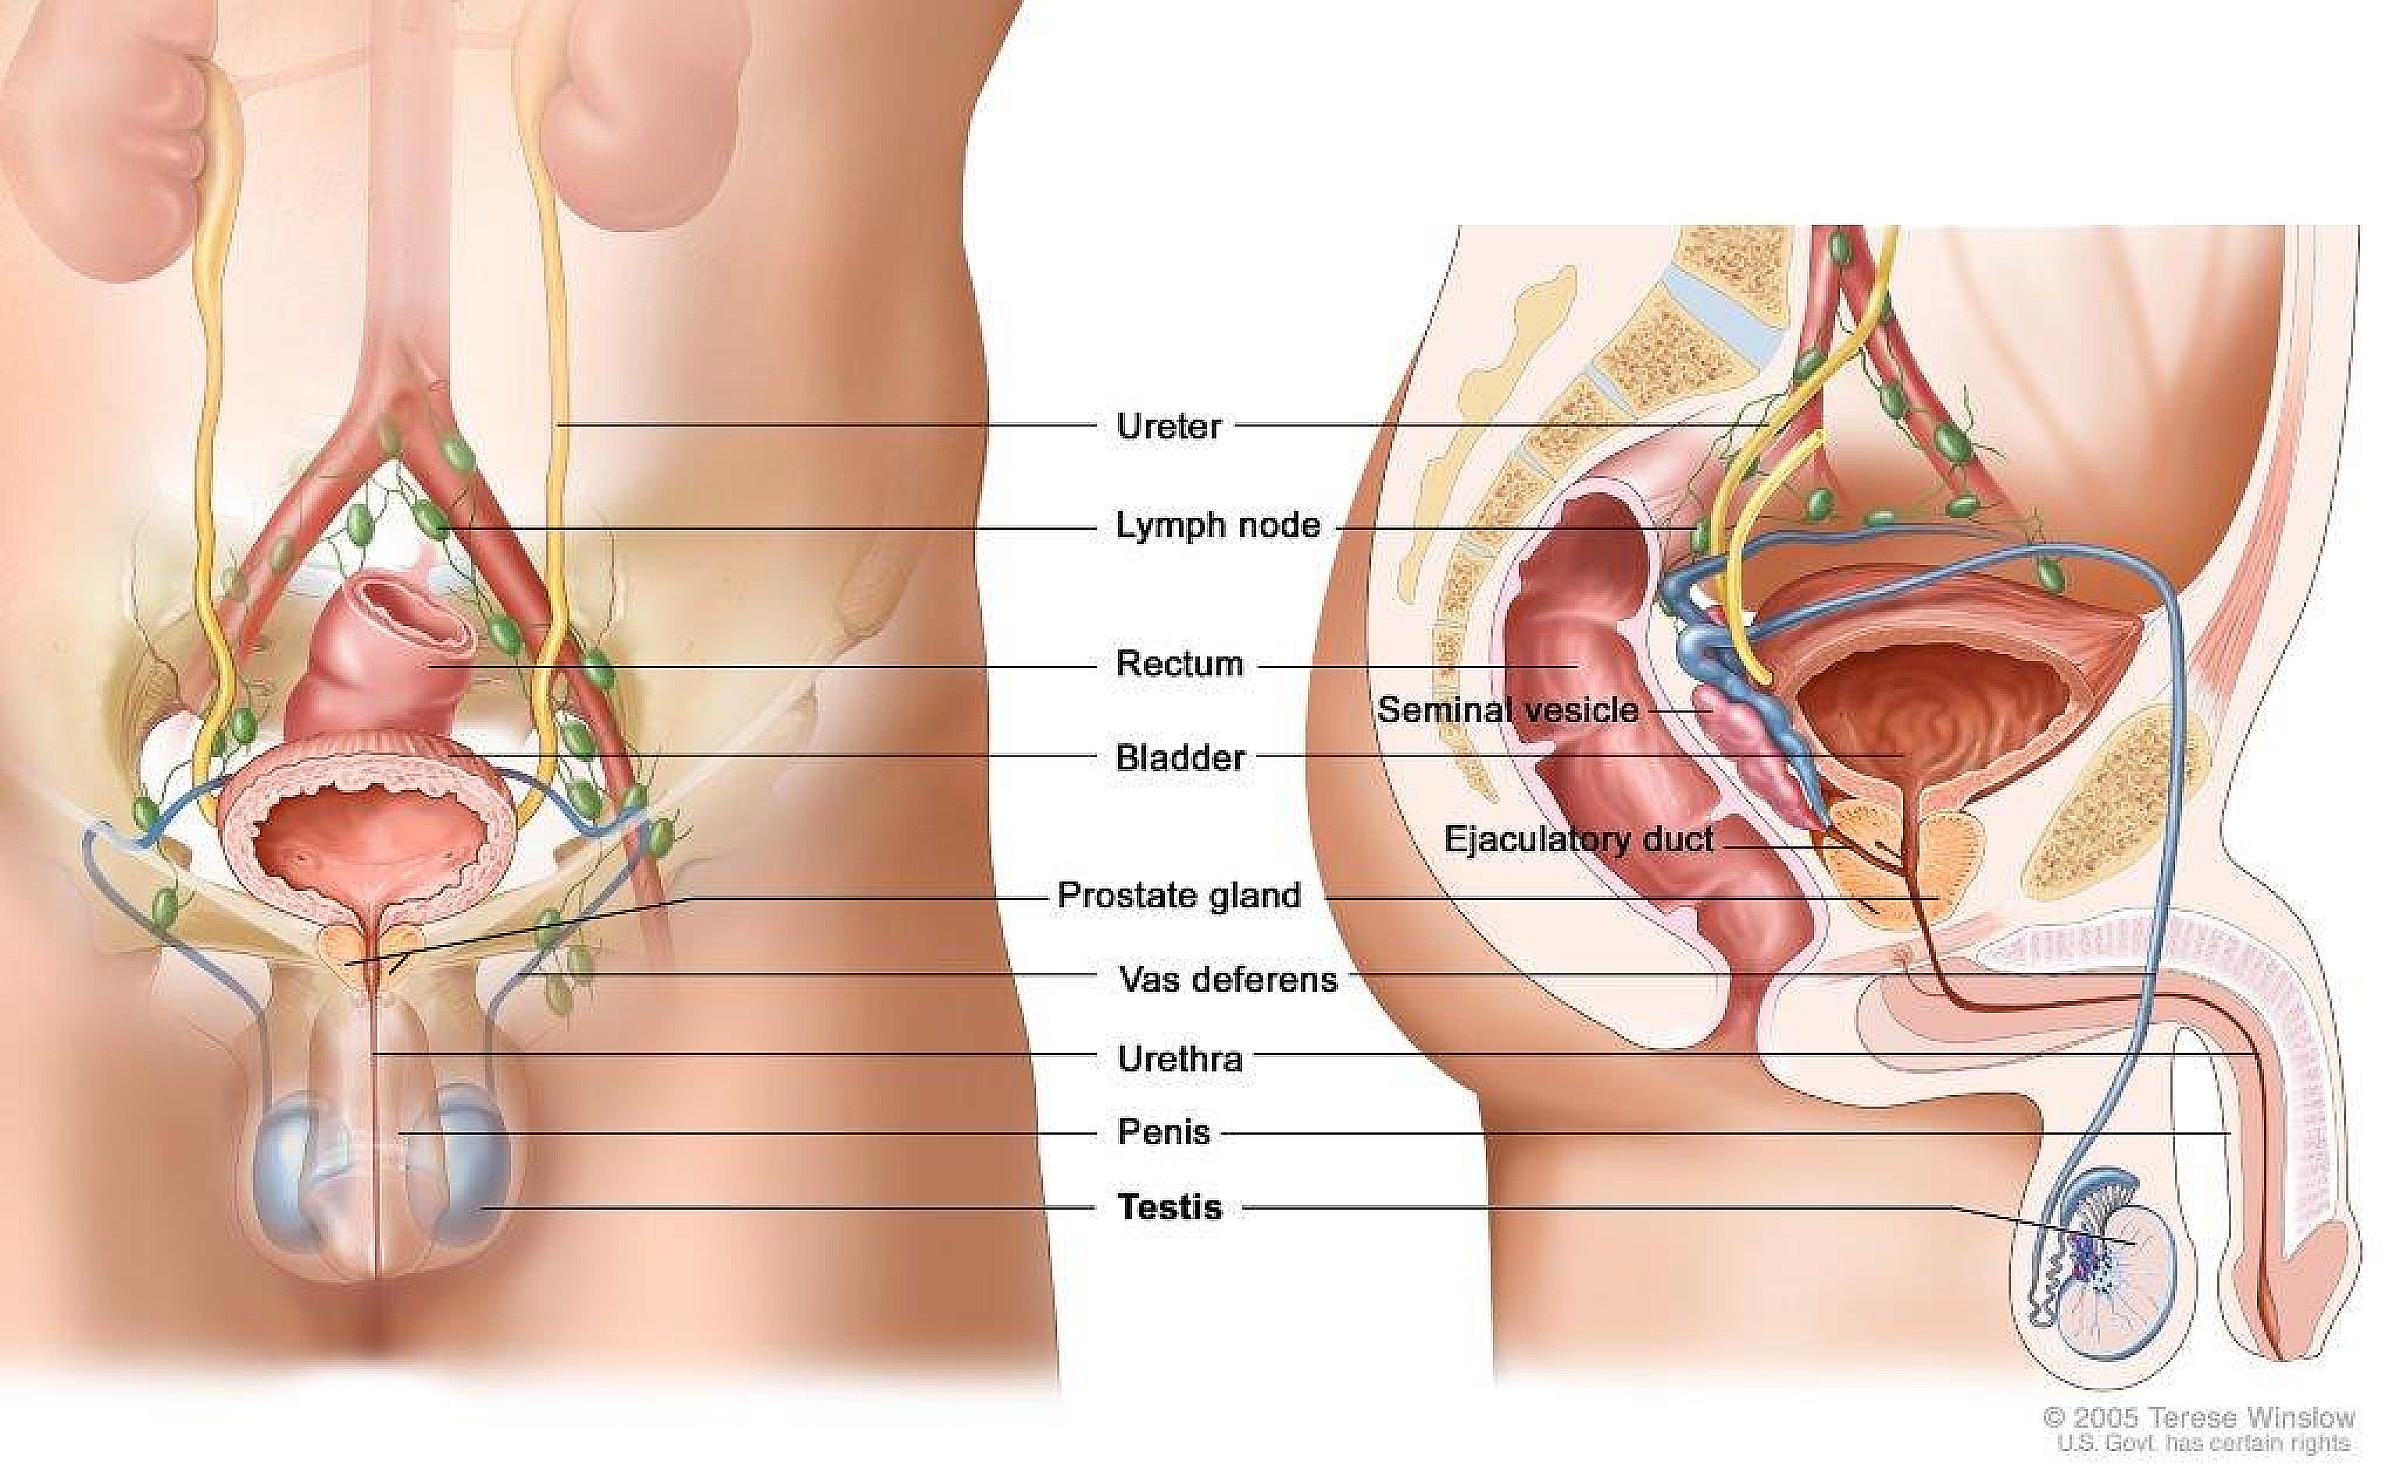 The male reproductive and urinary systems, showing the testicles, prostate, bladder, and other organs.